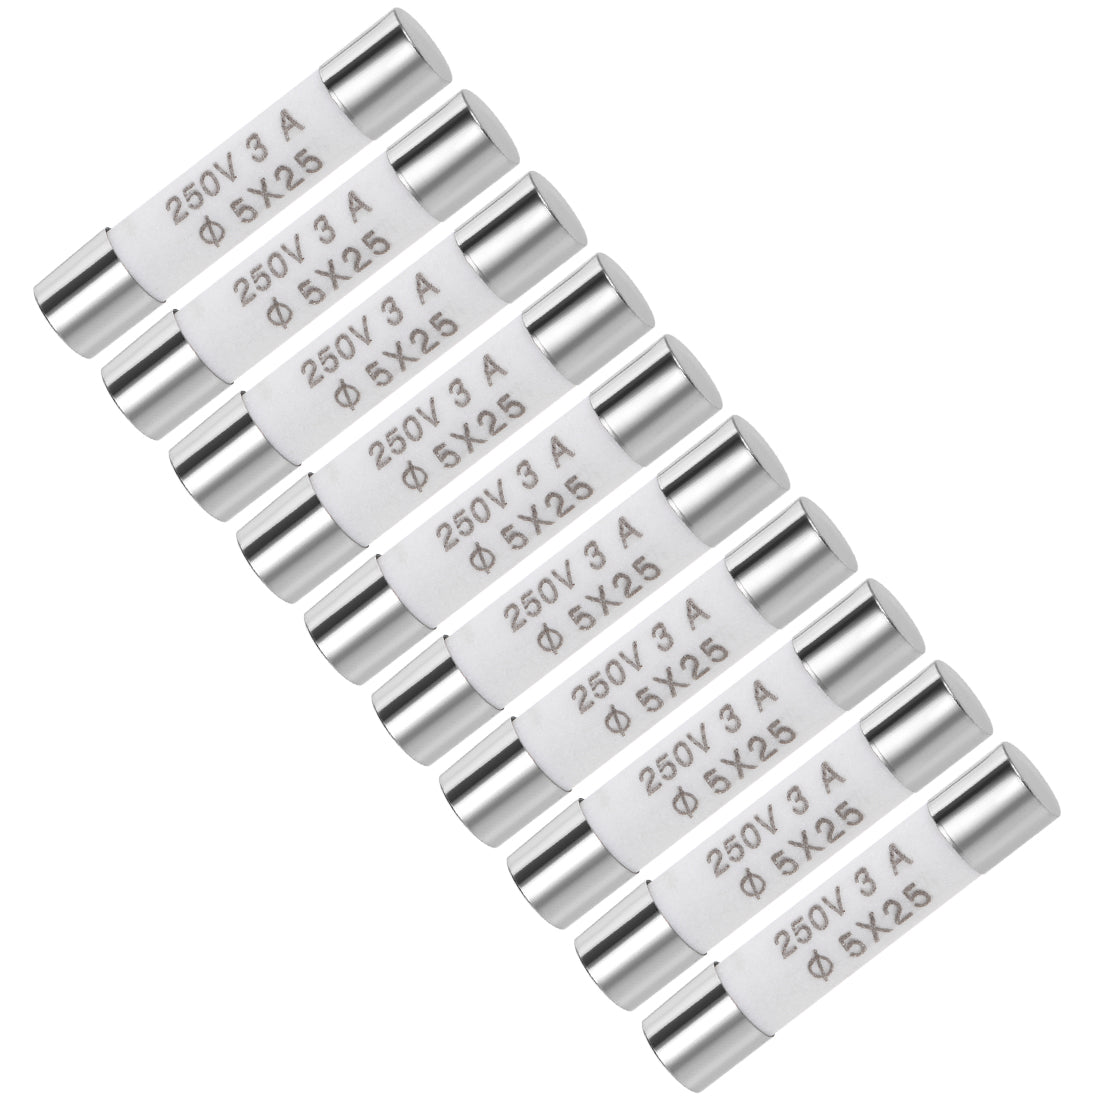 uxcell Uxcell Cartridge Fuses 3A 250V 5x25mm Fast Blow Audio Alarm Amplifier Ceramic 10pcs